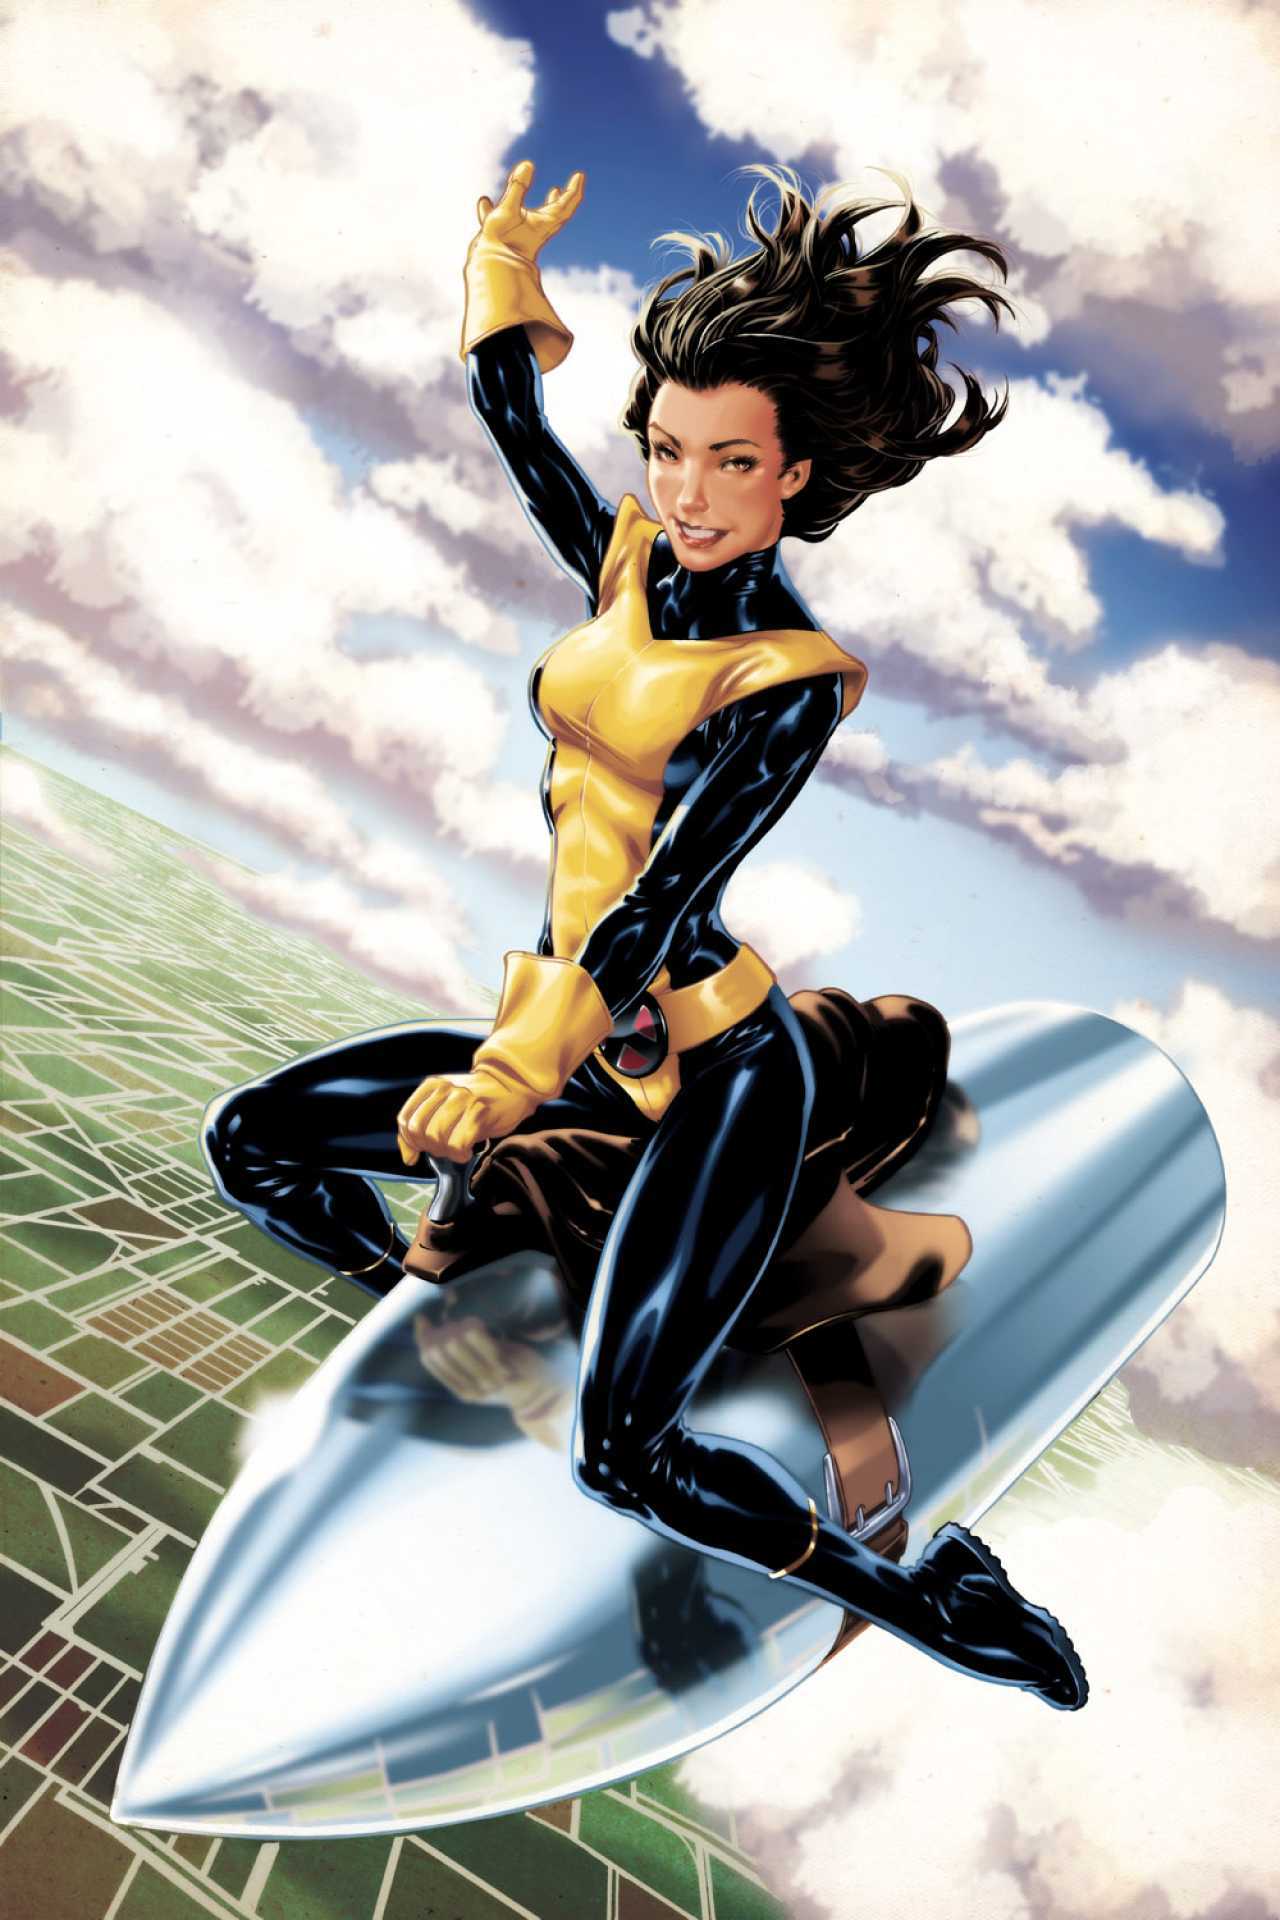 51 Hot Pictures Of Kitty Pryde That Will Make Your Heart Pound For Her 17